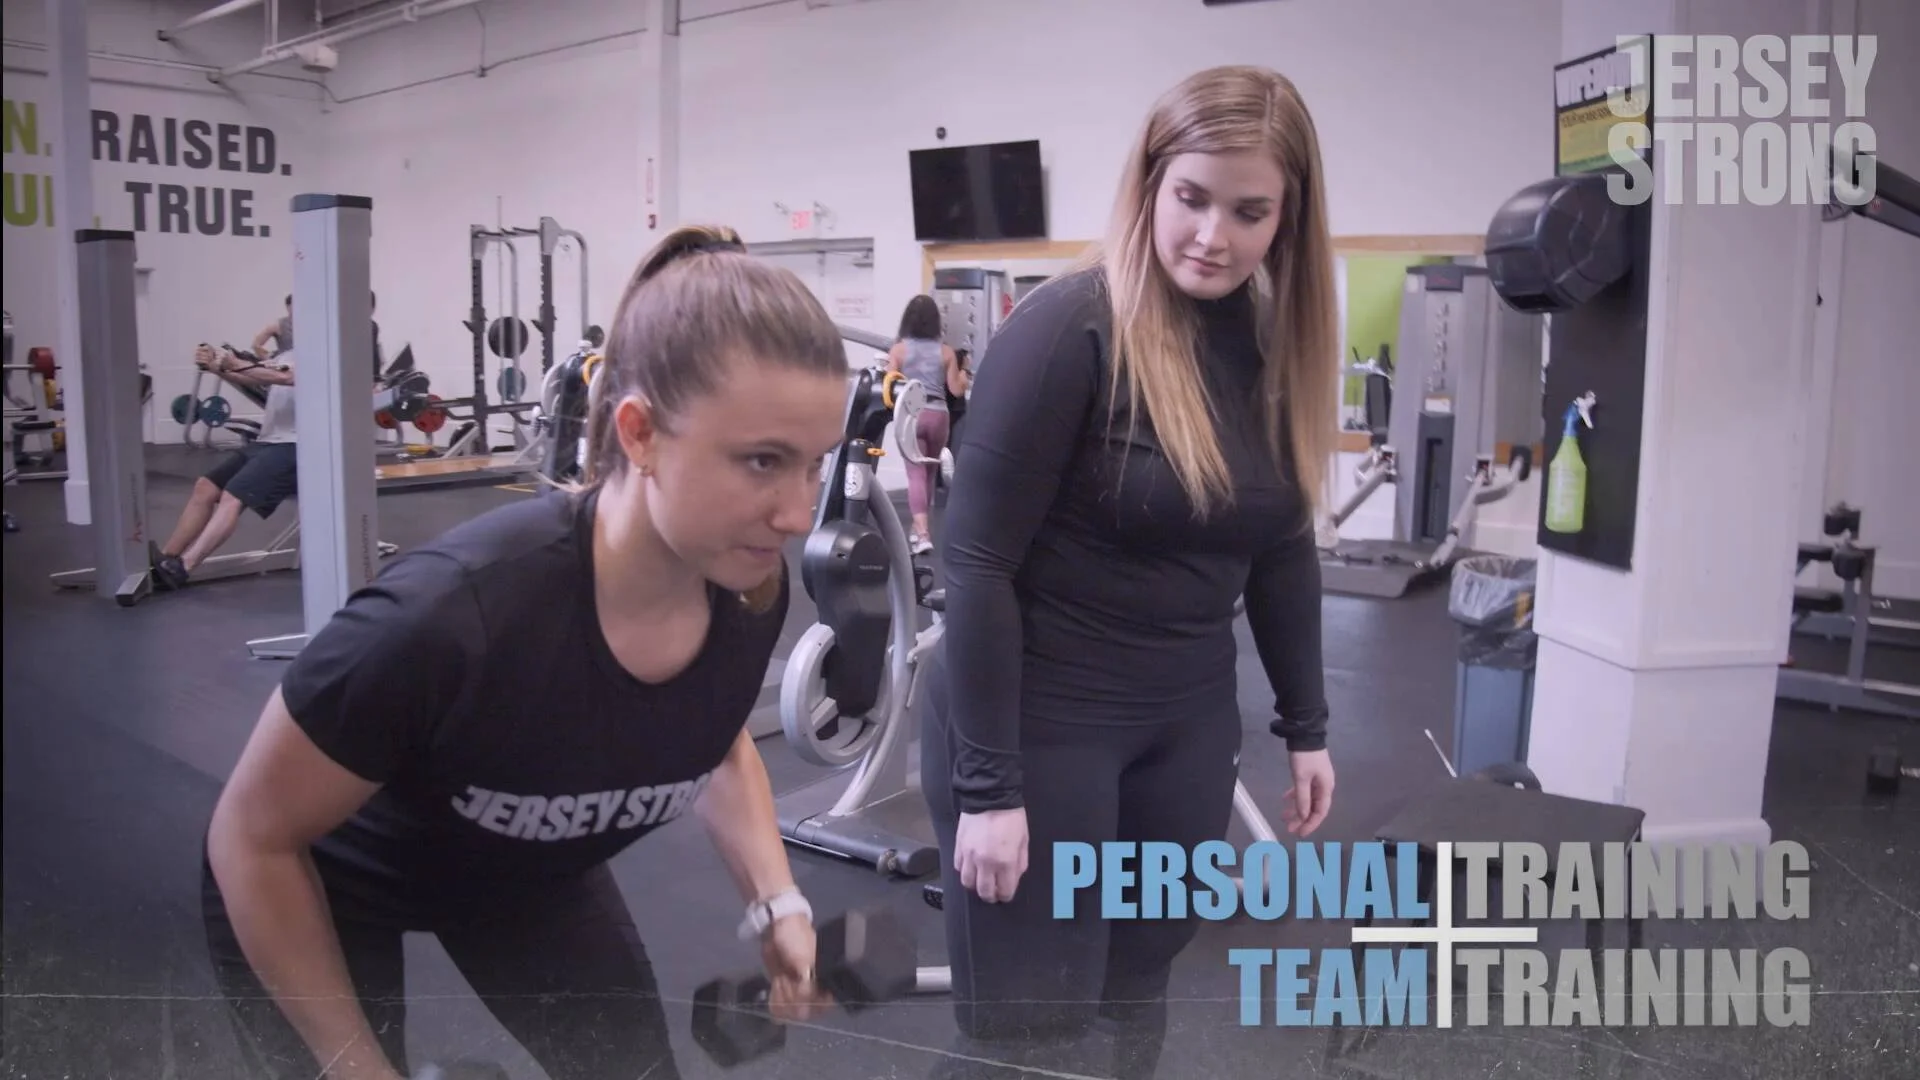 Personal Training in NJ | Jersey Strong 